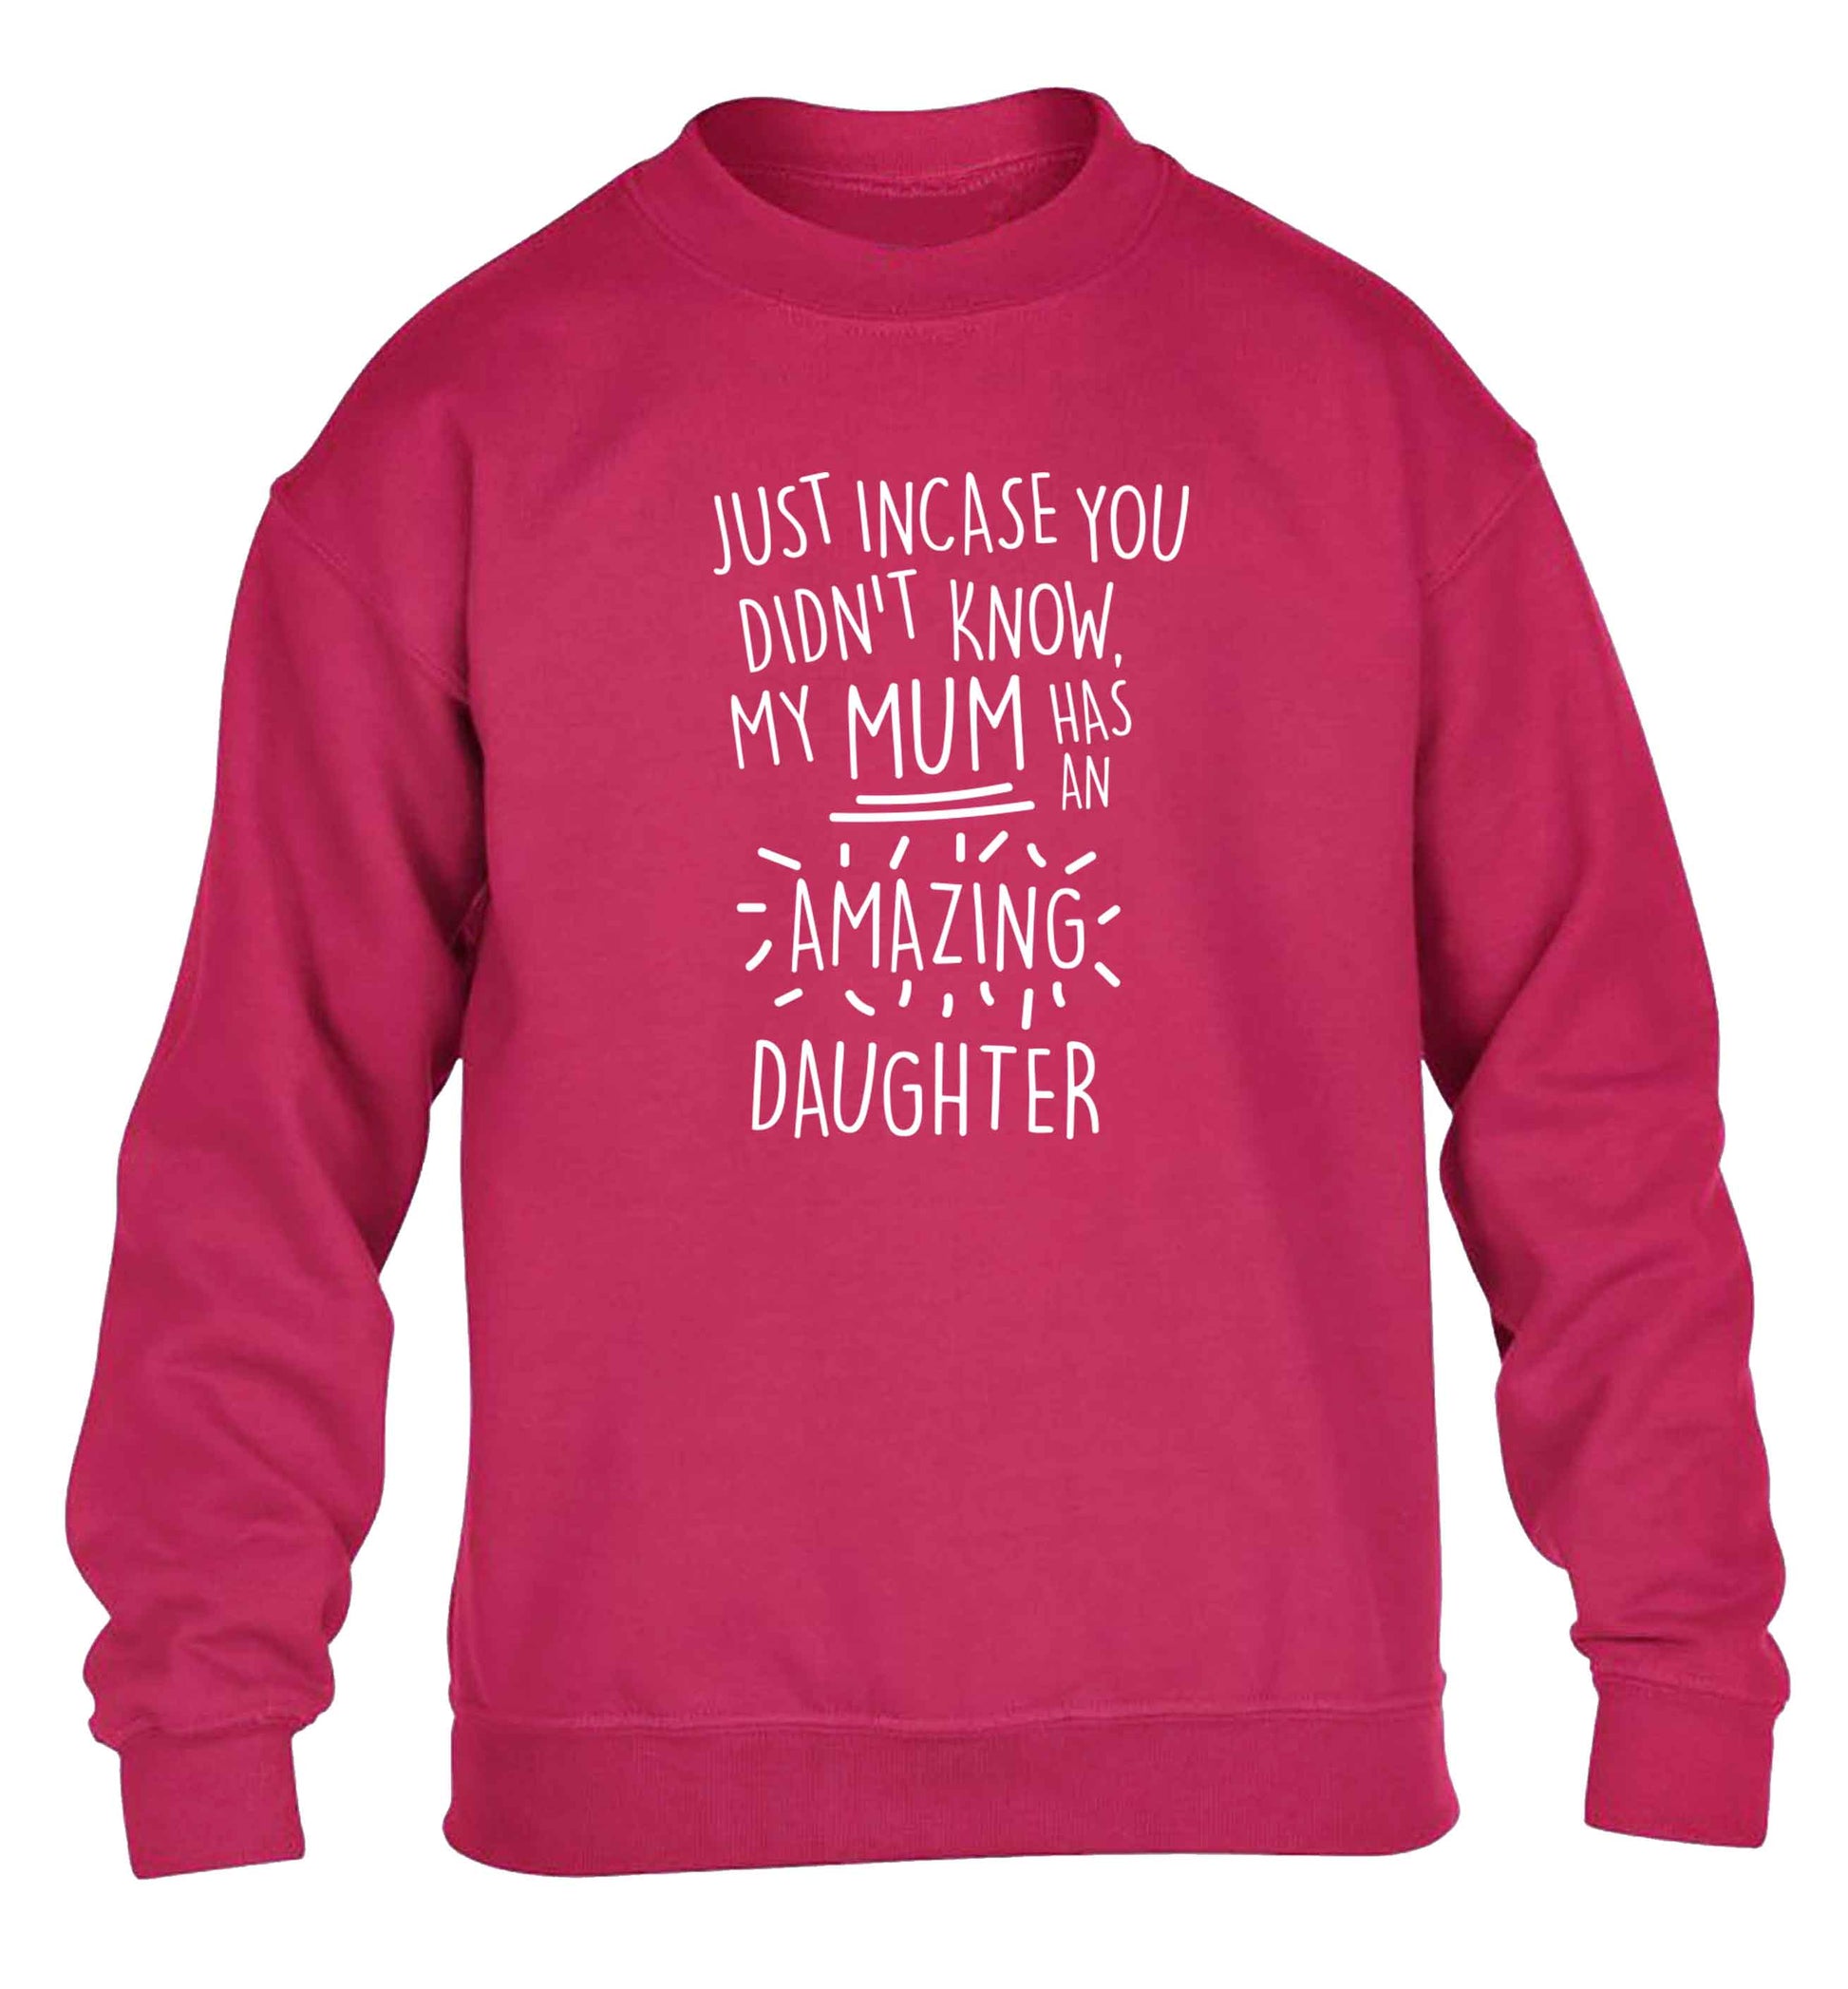 Just incase you didn't know my mum has an amazing daughter children's pink sweater 12-13 Years